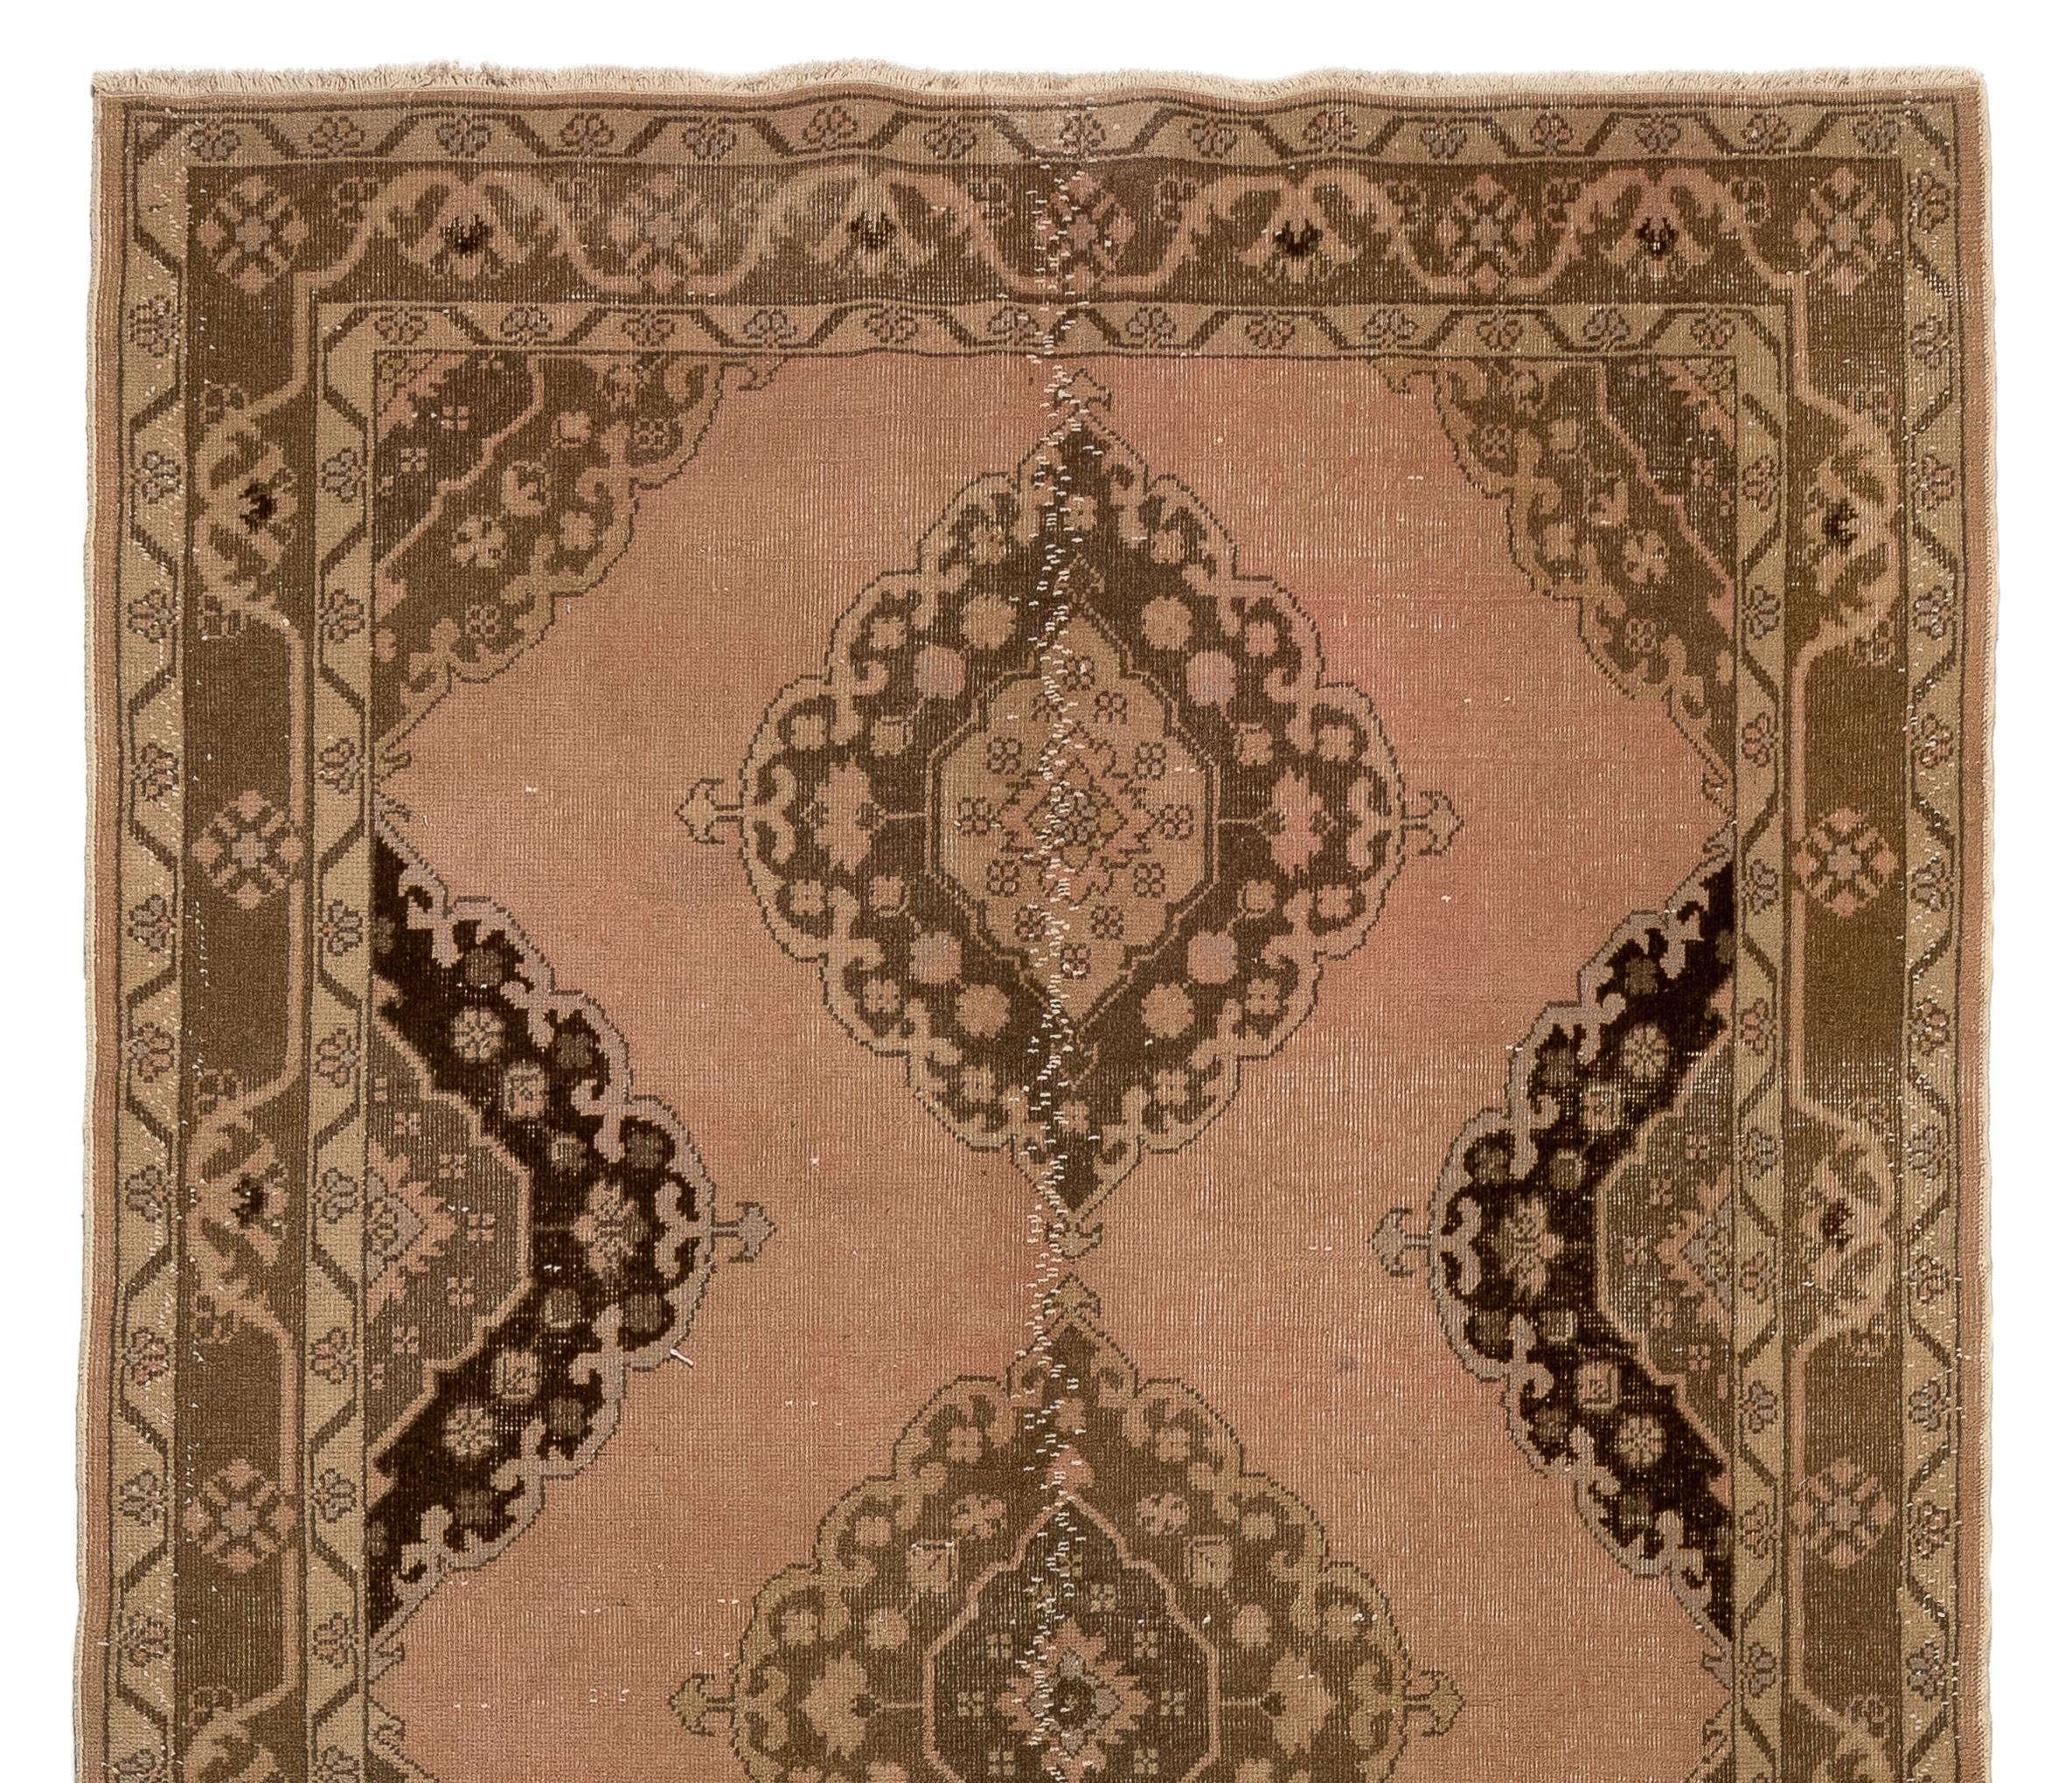 A vintage Turkish runner rug that was hand-knotted in the 1960s with low wool on cotton foundation. It features multiple linked medallions in brown and sand colors against a faded coral pink background. It is in good condition,